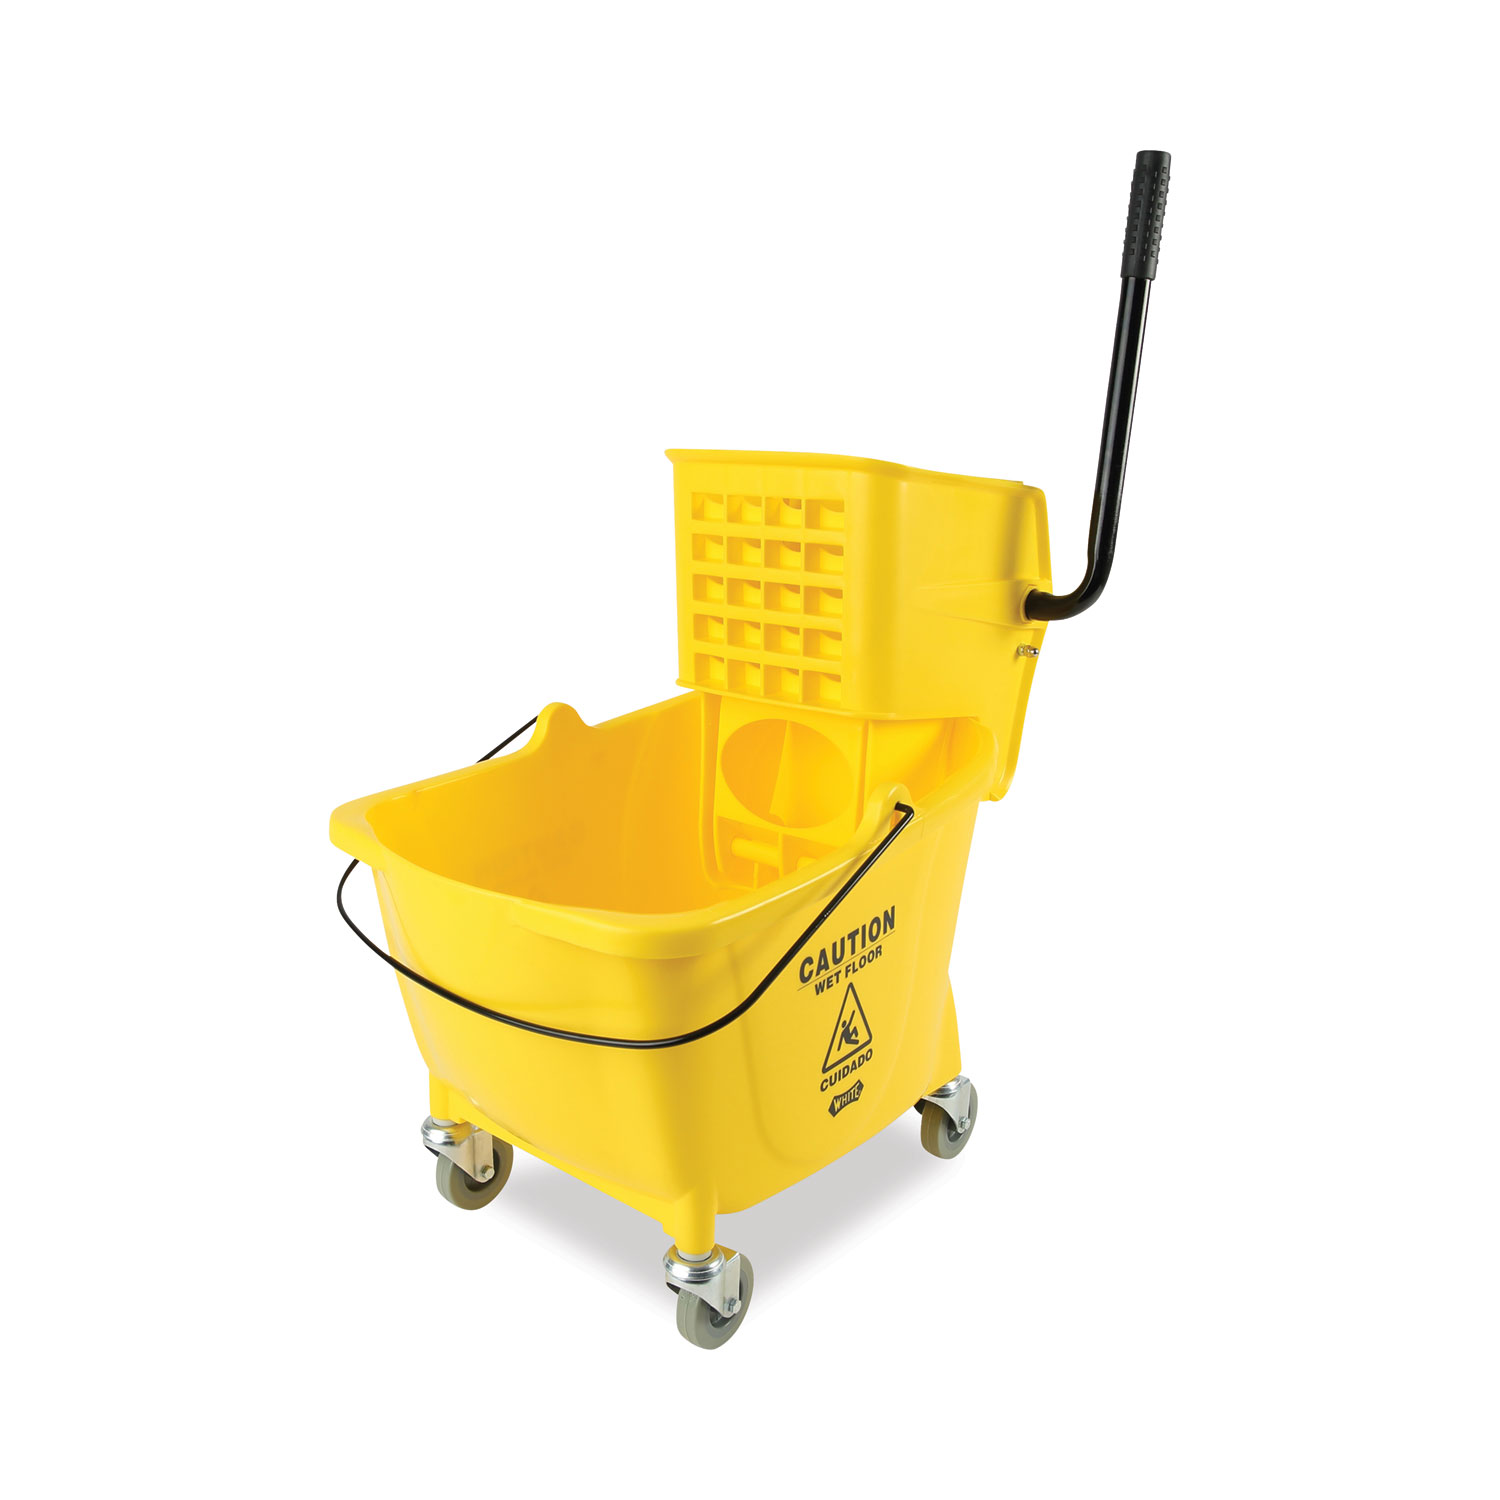 Mop Bucket with Side Press Wringer Combo, Yellow, 35 qt.